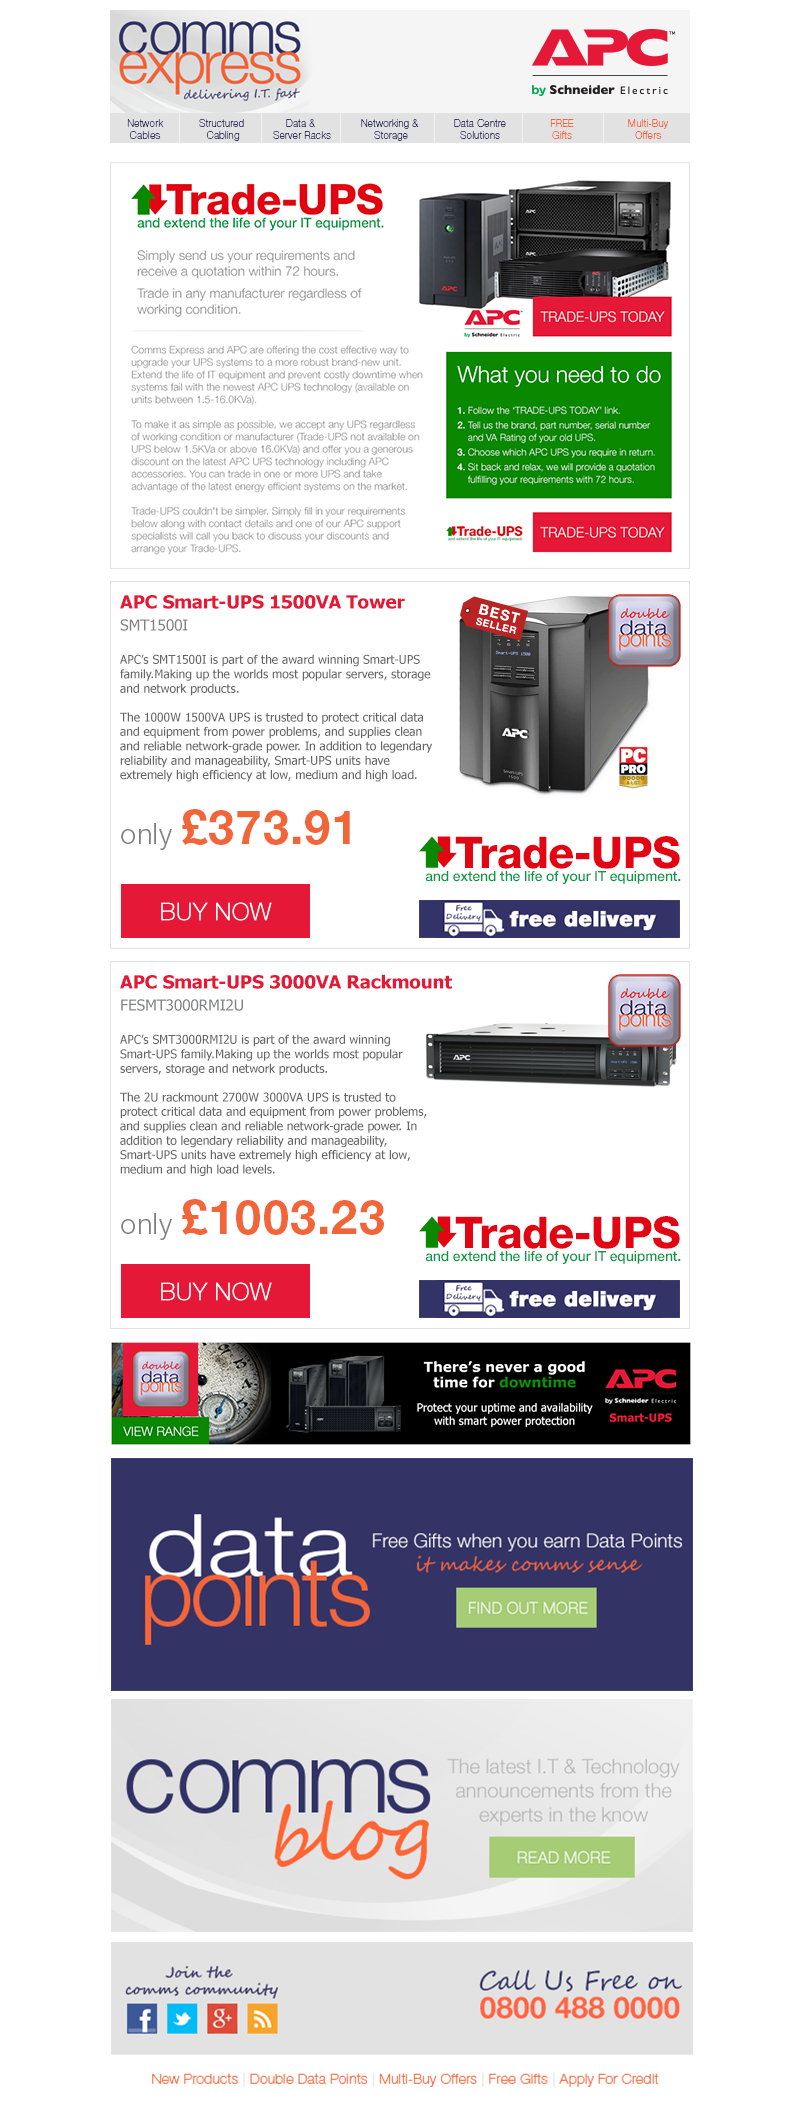 INTRODUCING APC Trade-UPS - extend the life of your IT 